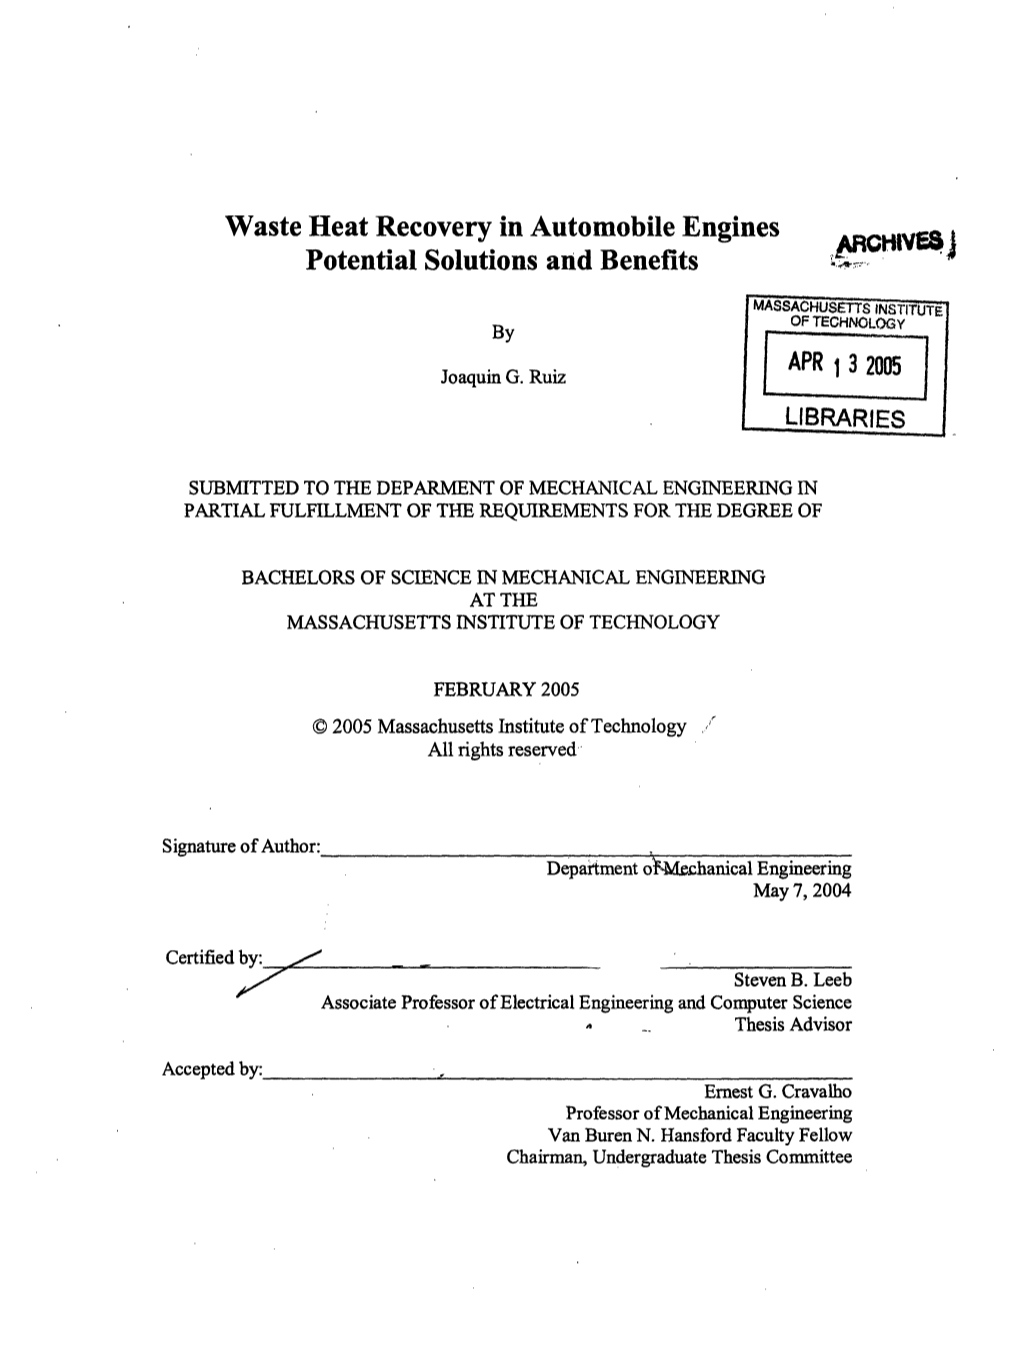 Waste Heat Recovery in Automobile Engines: Potential Solutions and Benefits